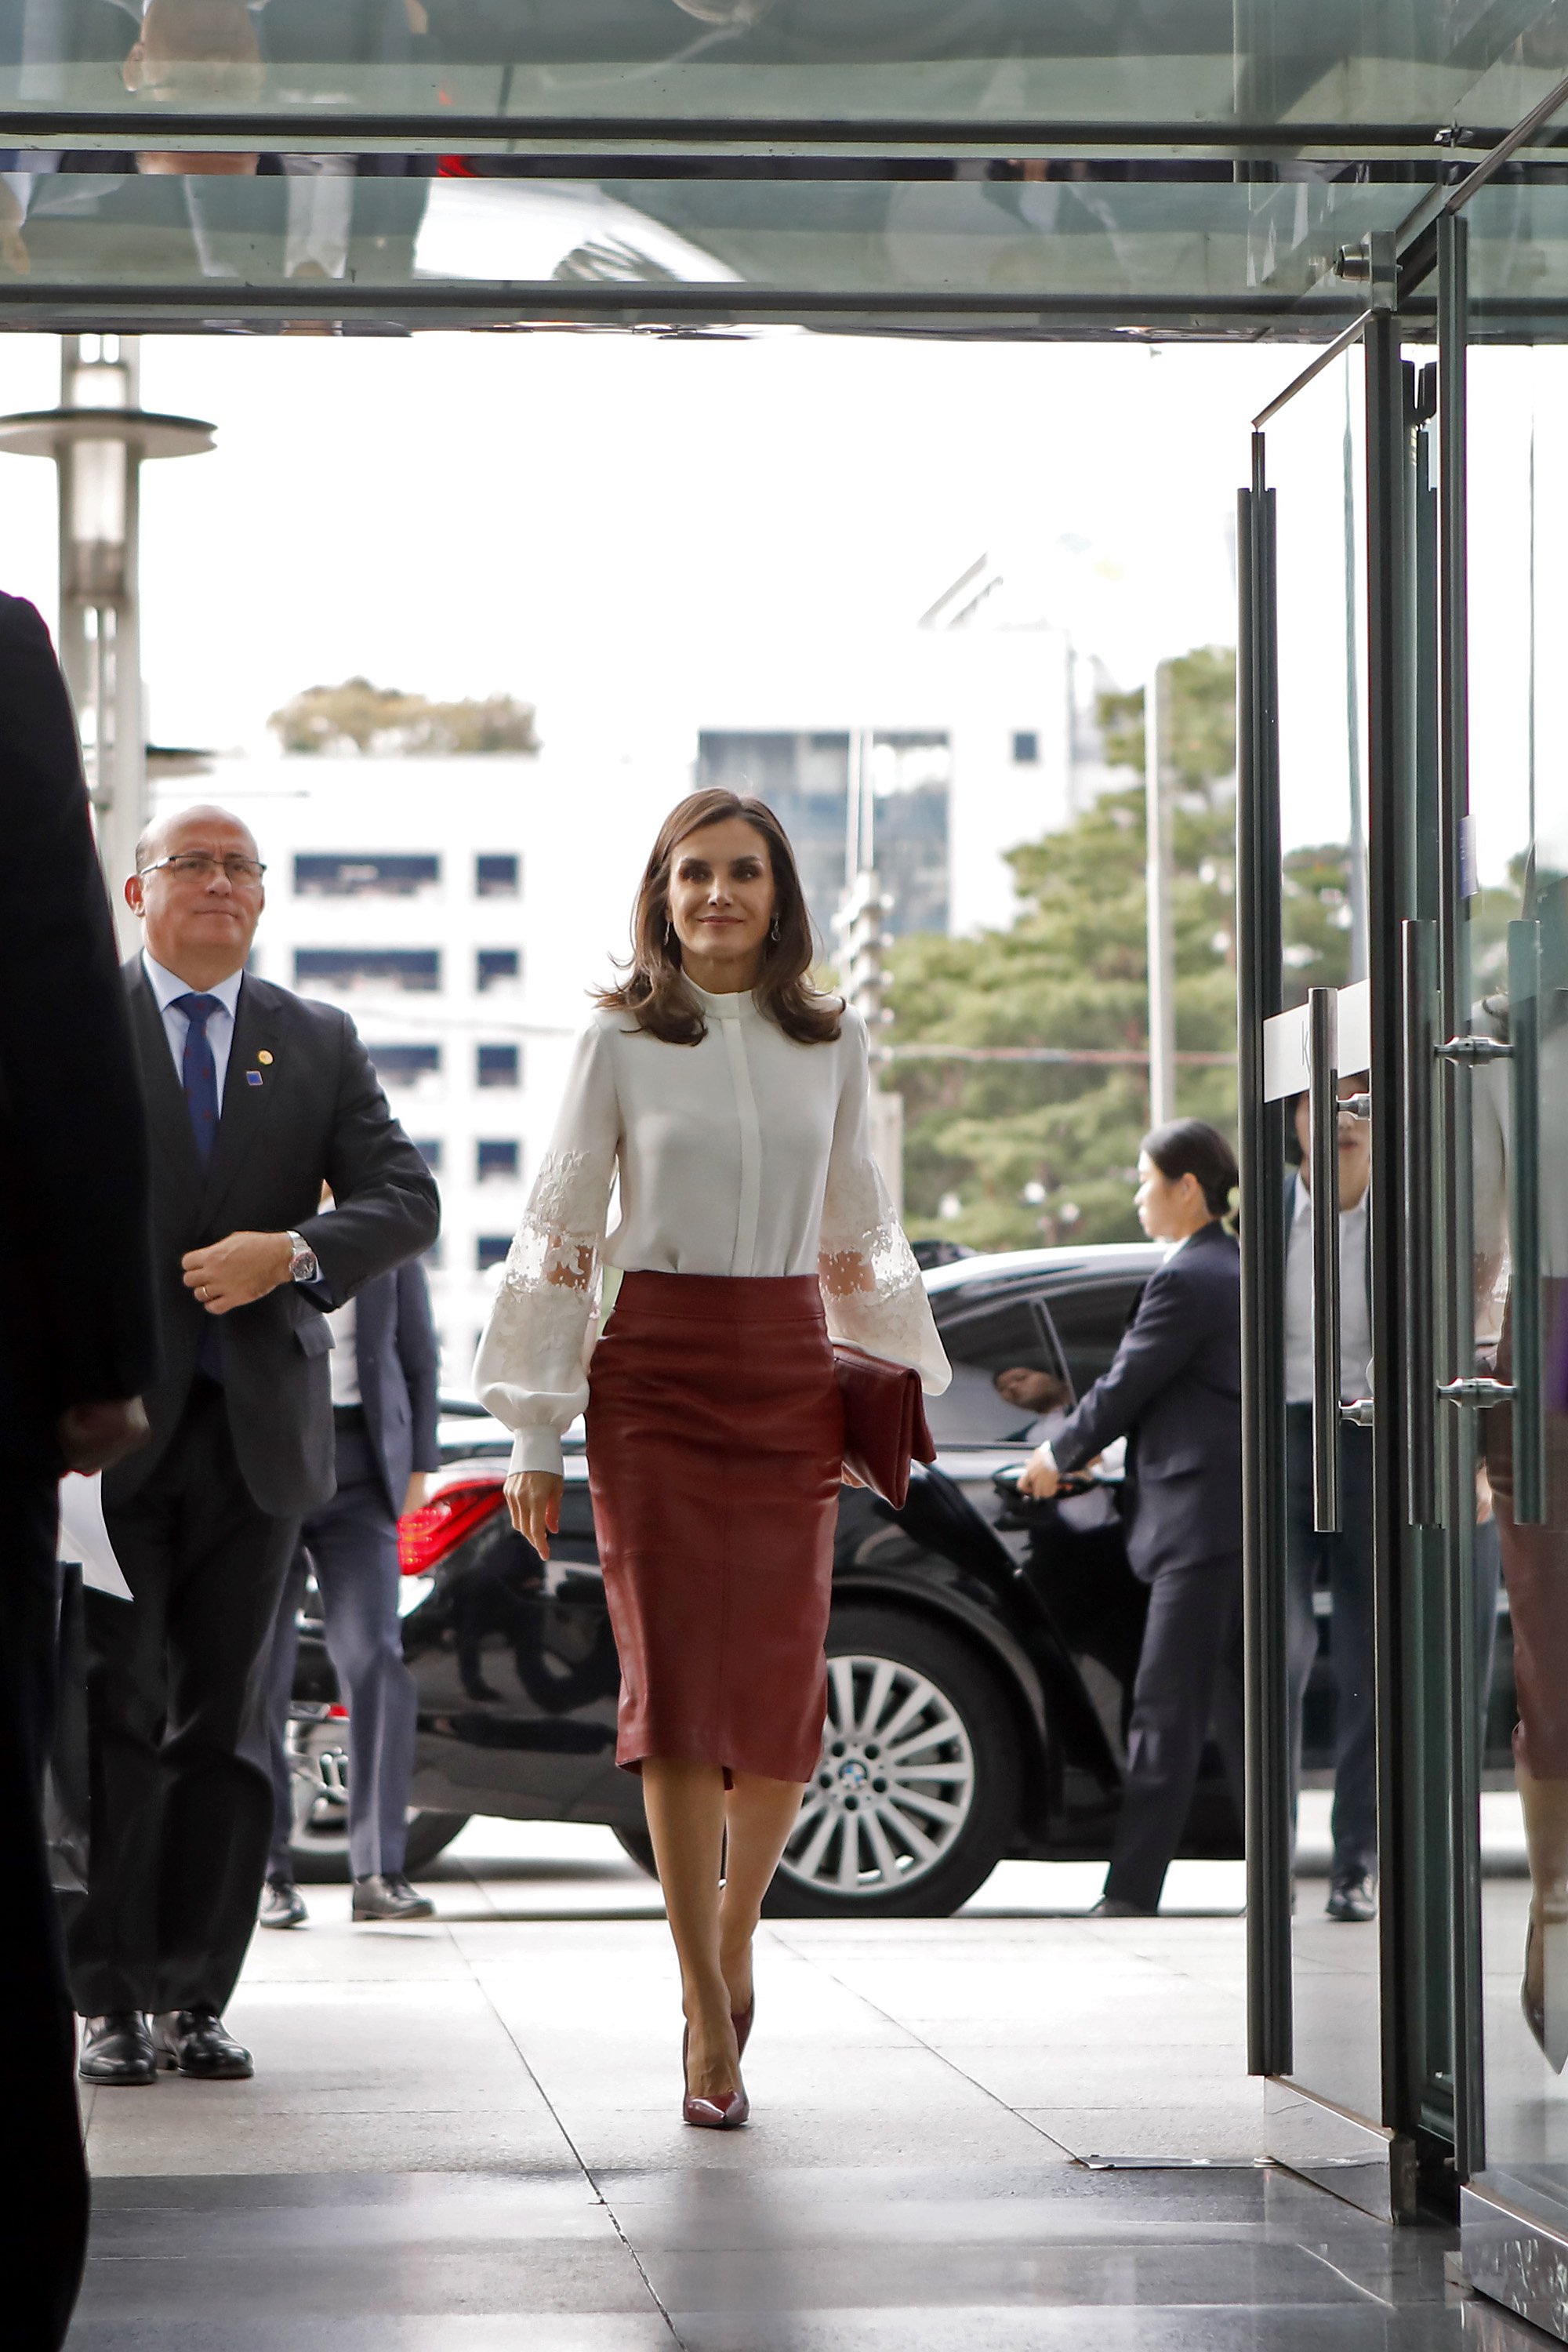 Queen Letizia of Spain arrives at KOTRA, on October 24, 2019 in Seoul, South Korea | Photo: GettyImages